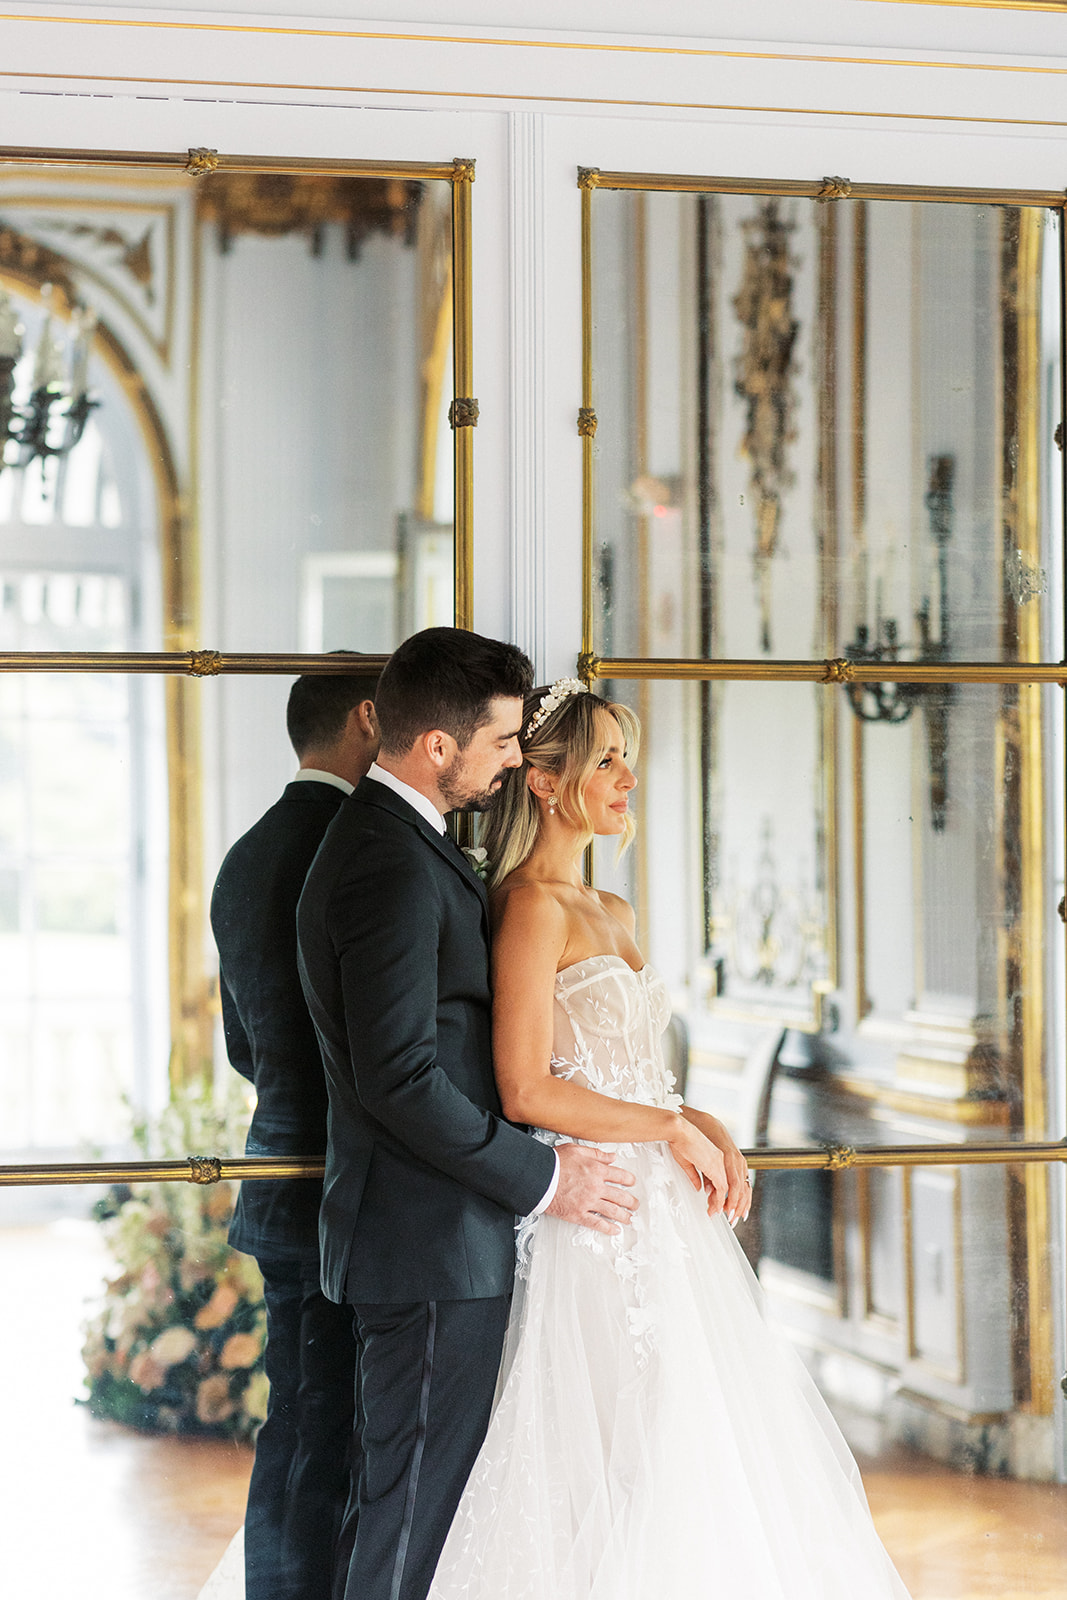 A bride leans into her groom as they stand in front of a large mirror with gold frame